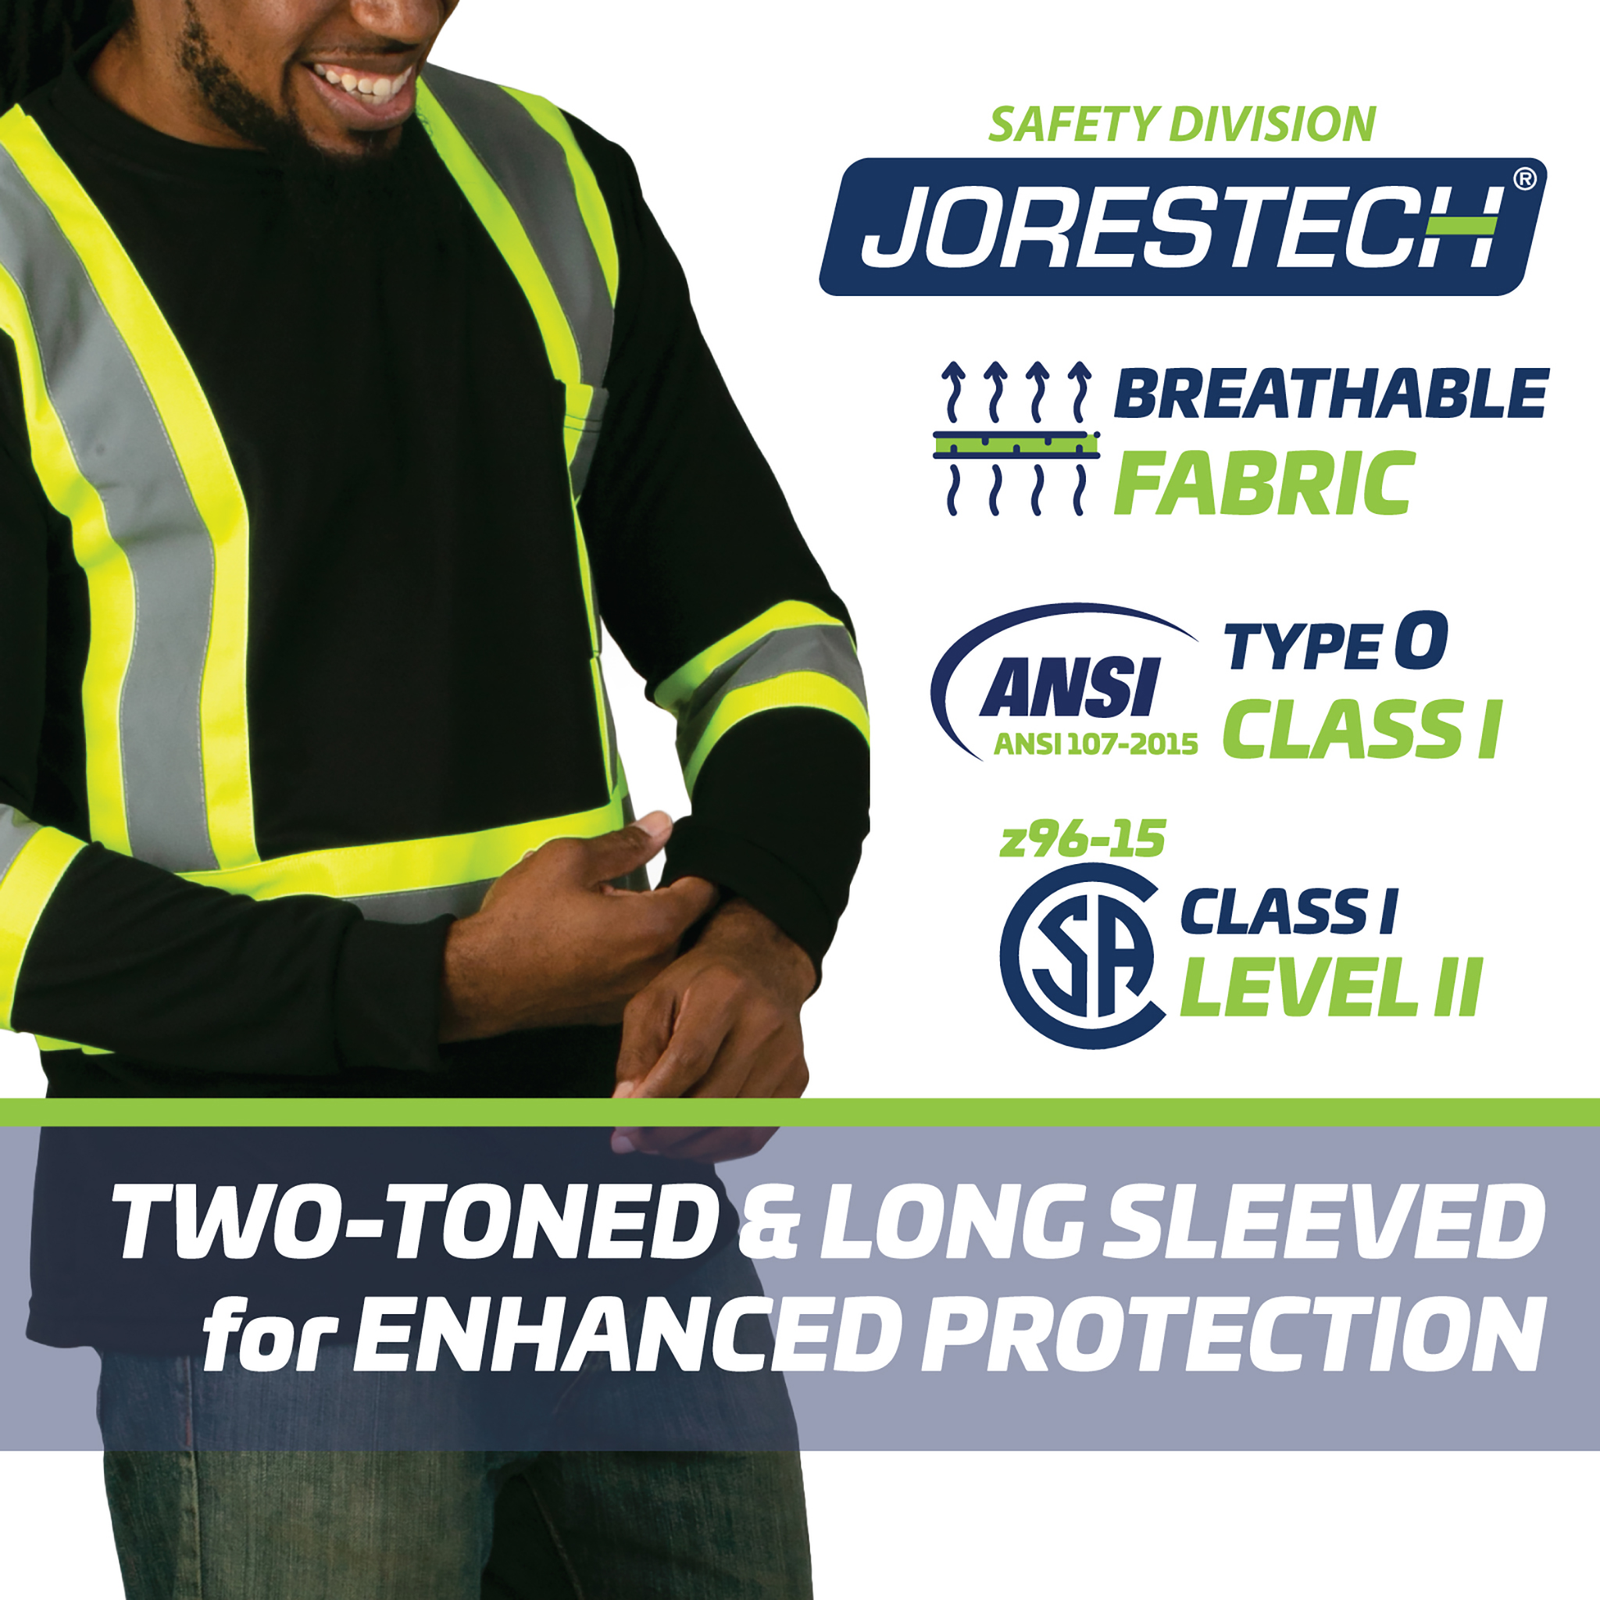 A man wearing a Black and yellow Reflective safety shirt. The following information is provided in the image: Breathable fabric, ANSI Type O, Class I. SA Class I Level II. Two toned for enhanced protection.